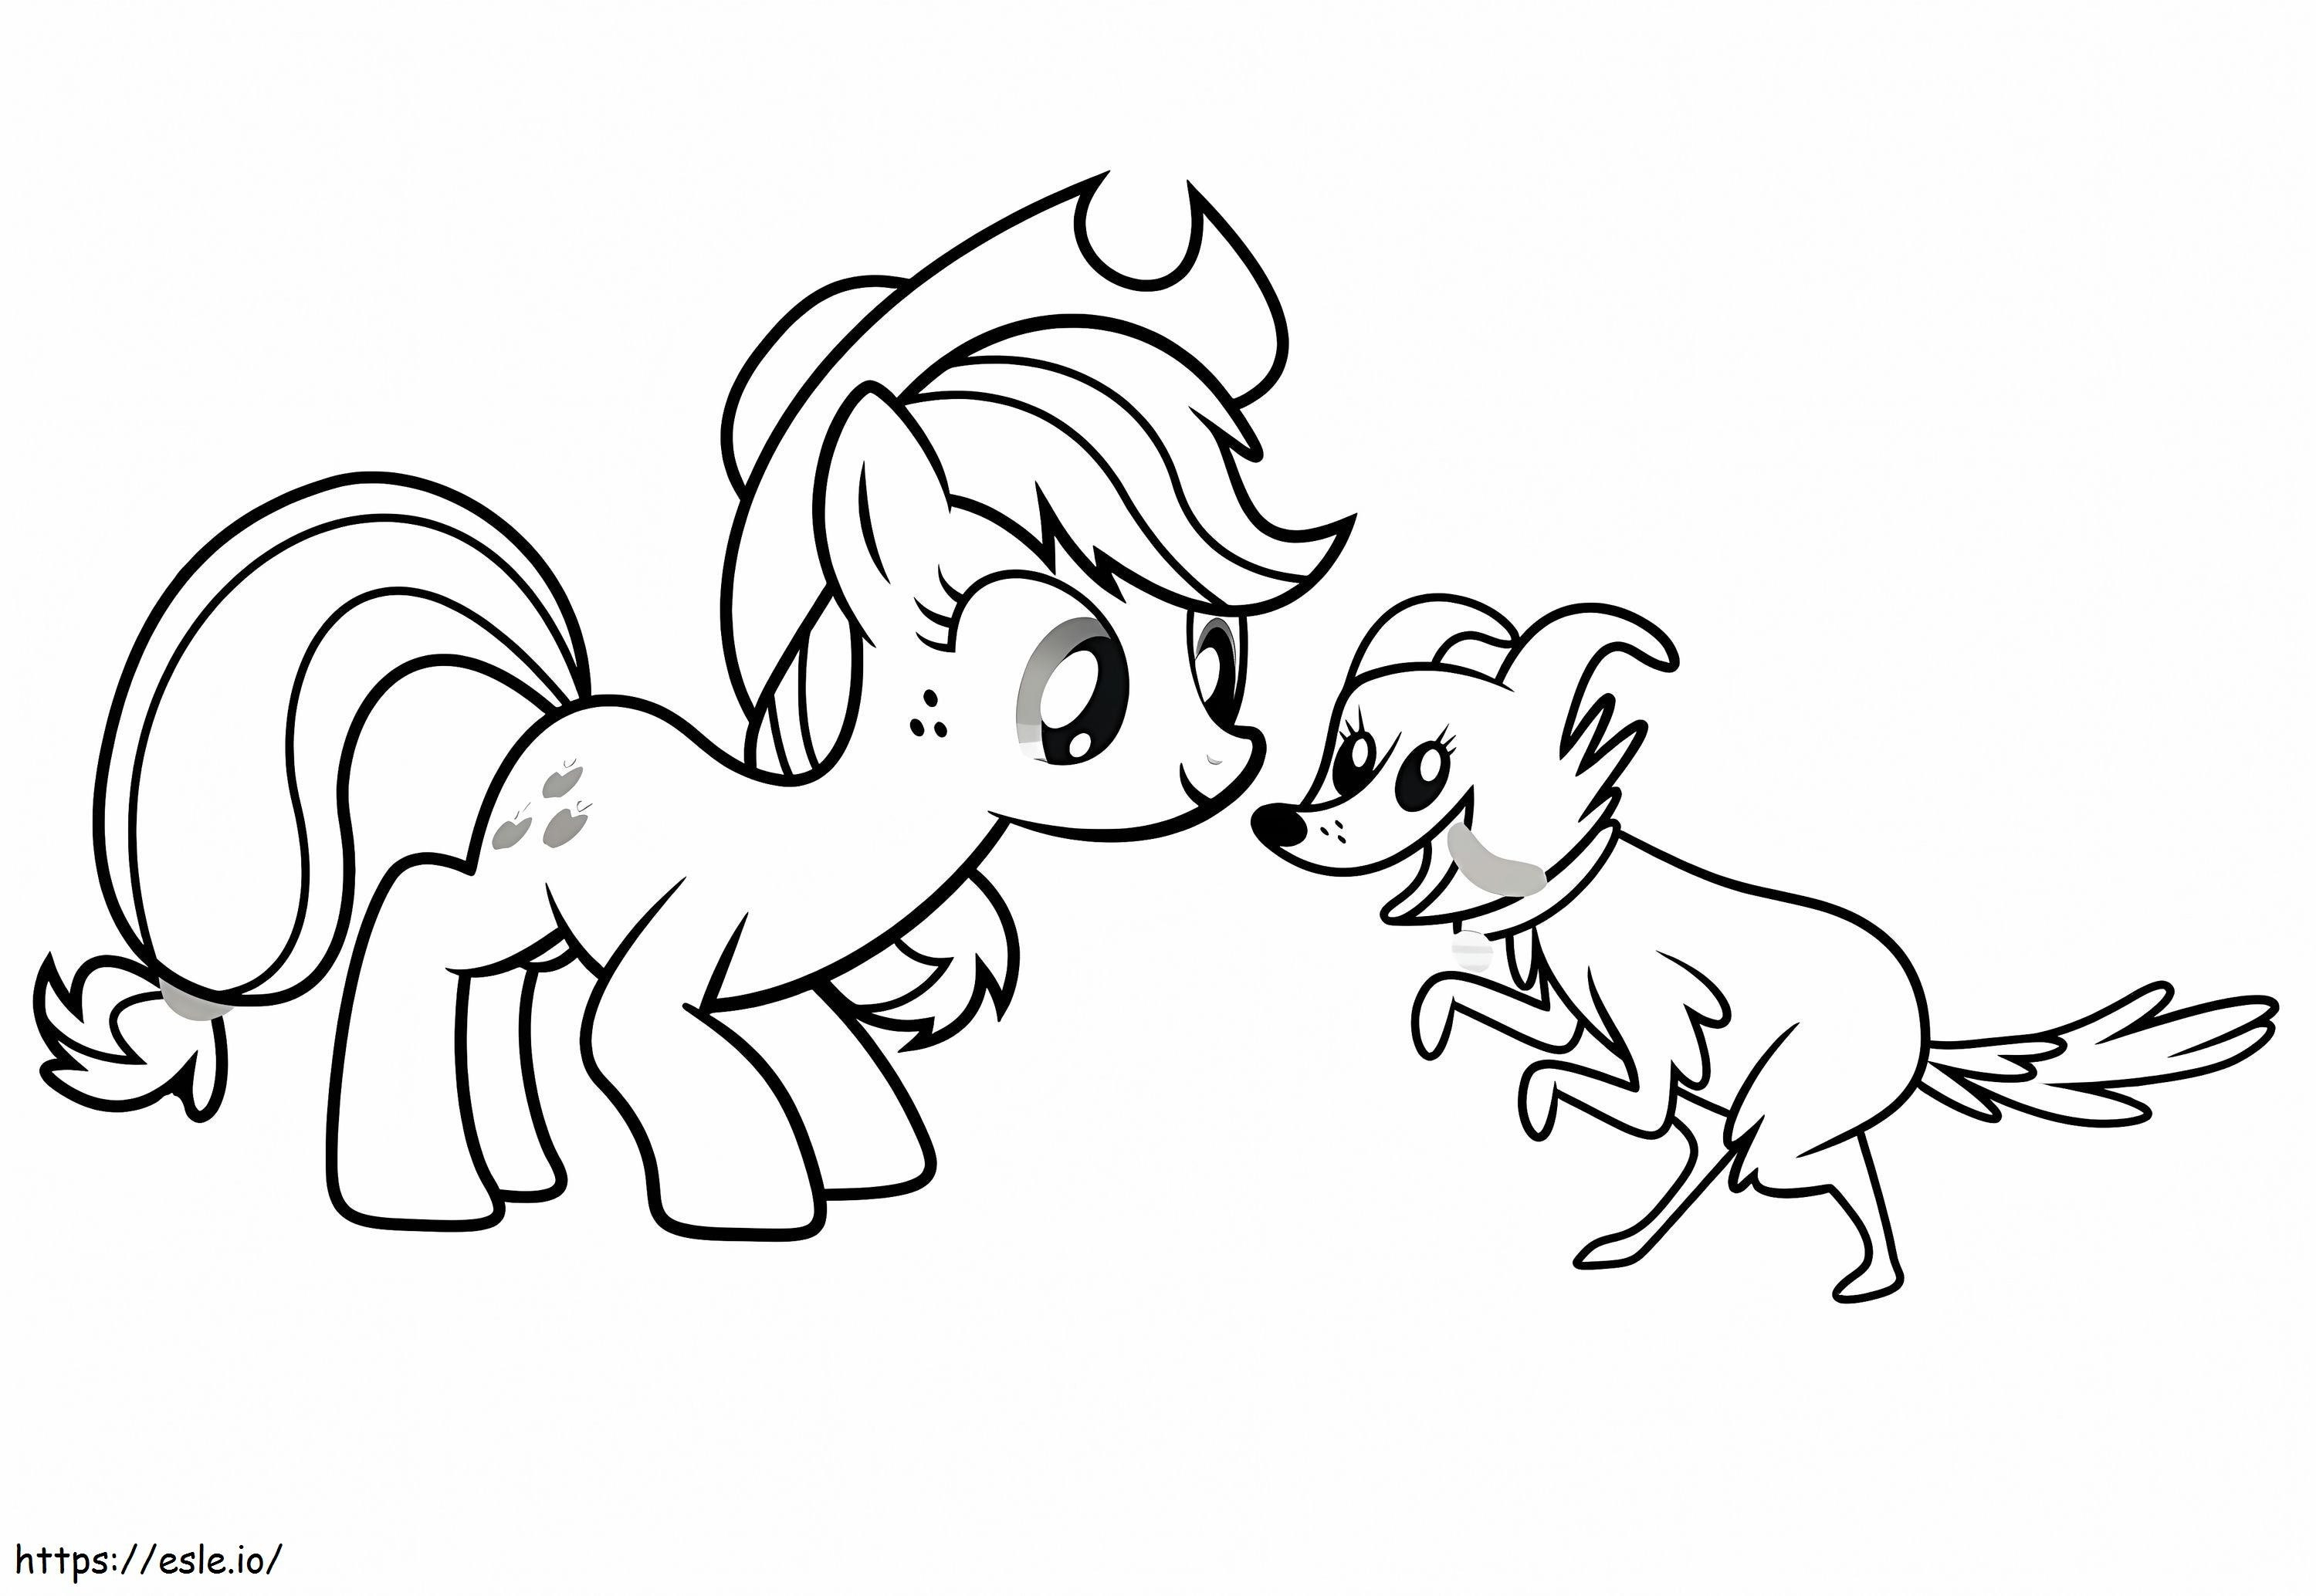 Applejack And Cute Dog coloring page